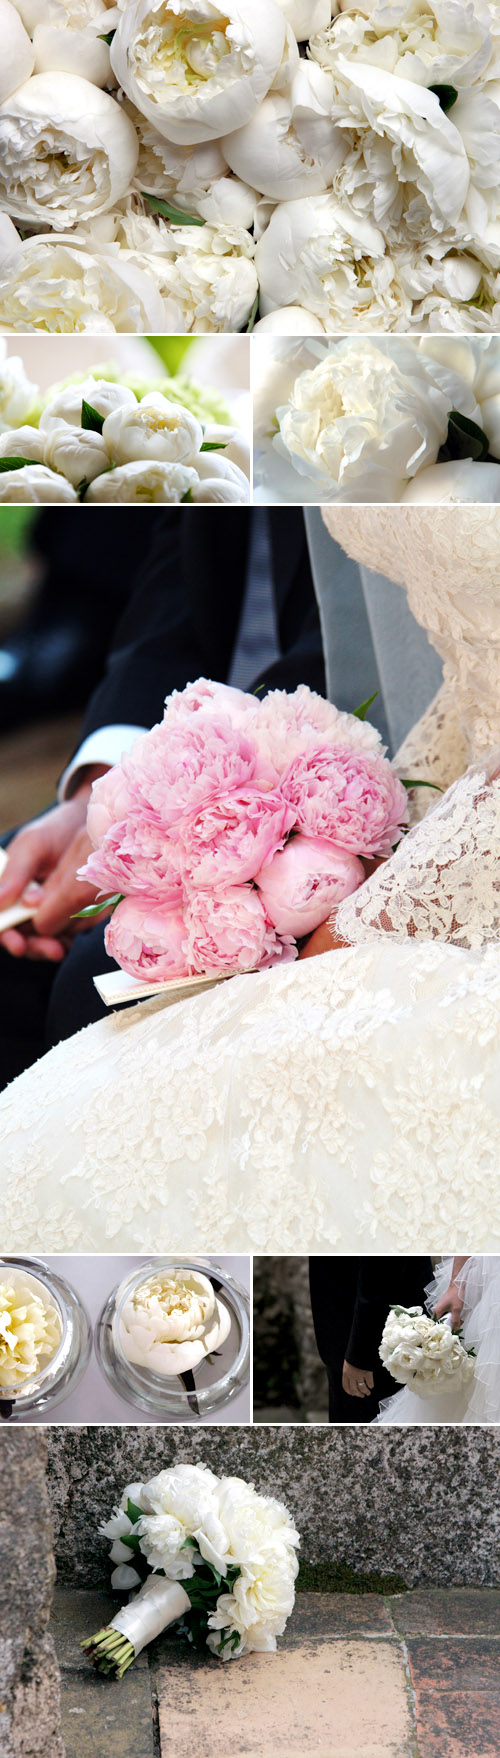 spring wedding flowers - pink and white peonies in bridal bouquets and wedding decor